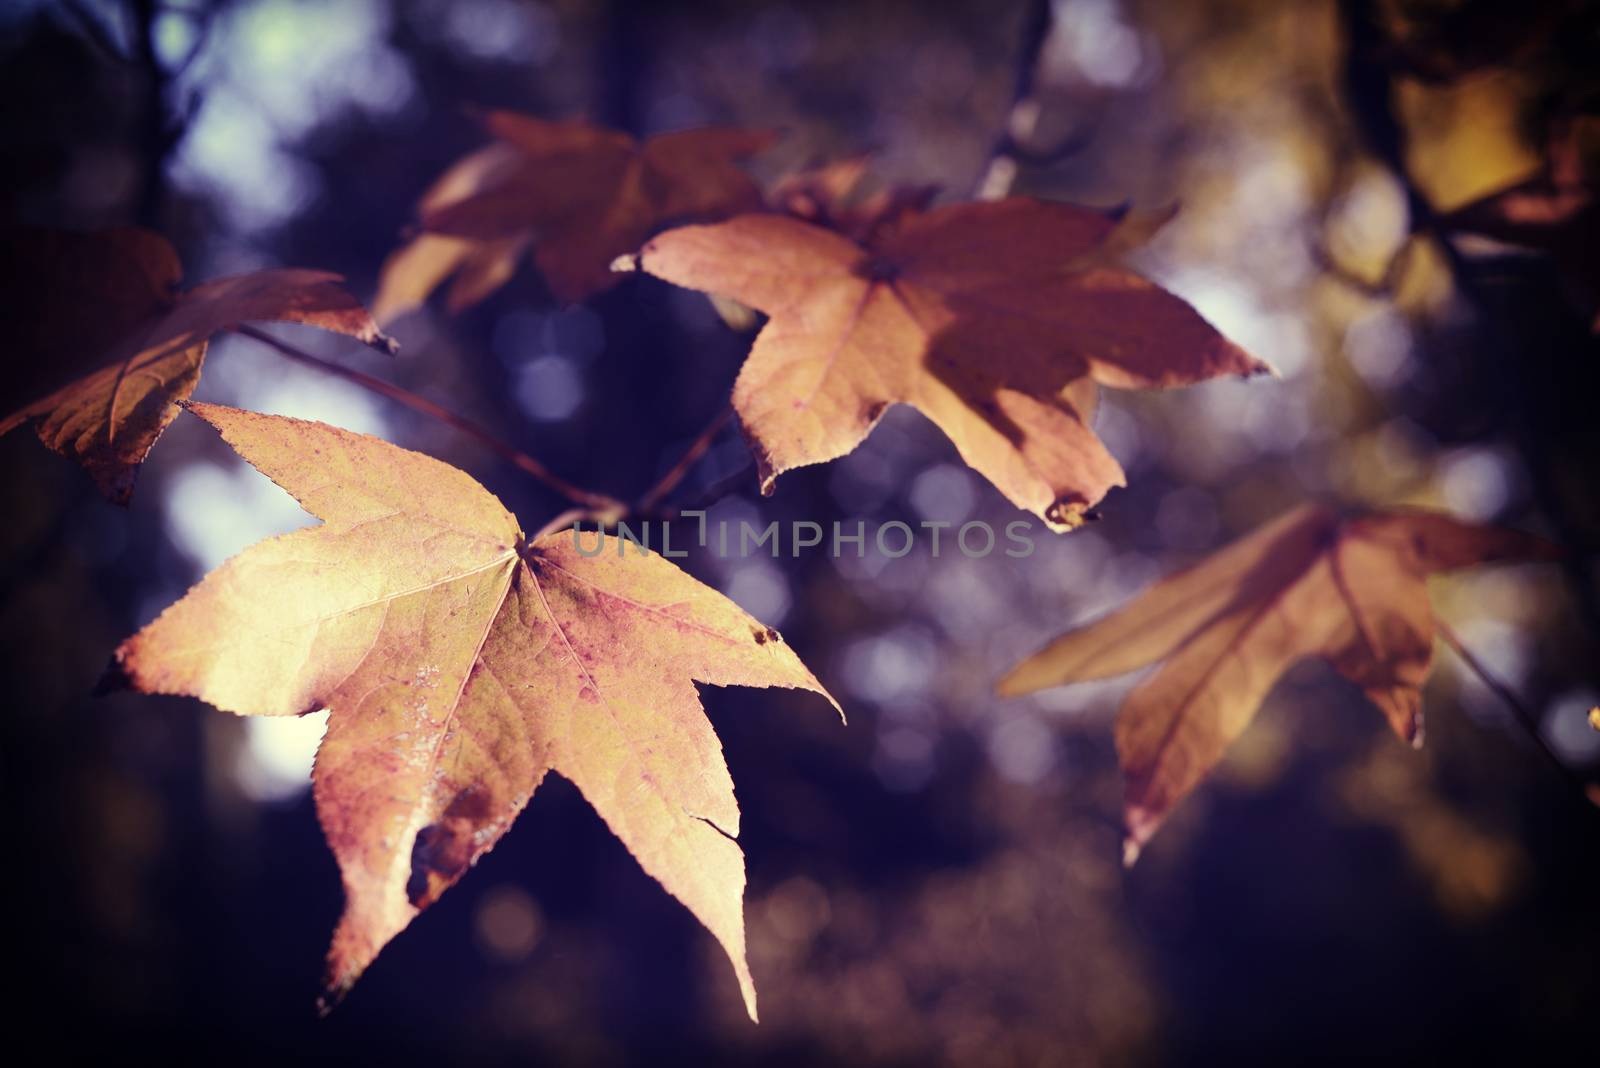 Fall season foliage close up of tree branch and leaves with soft blur background.